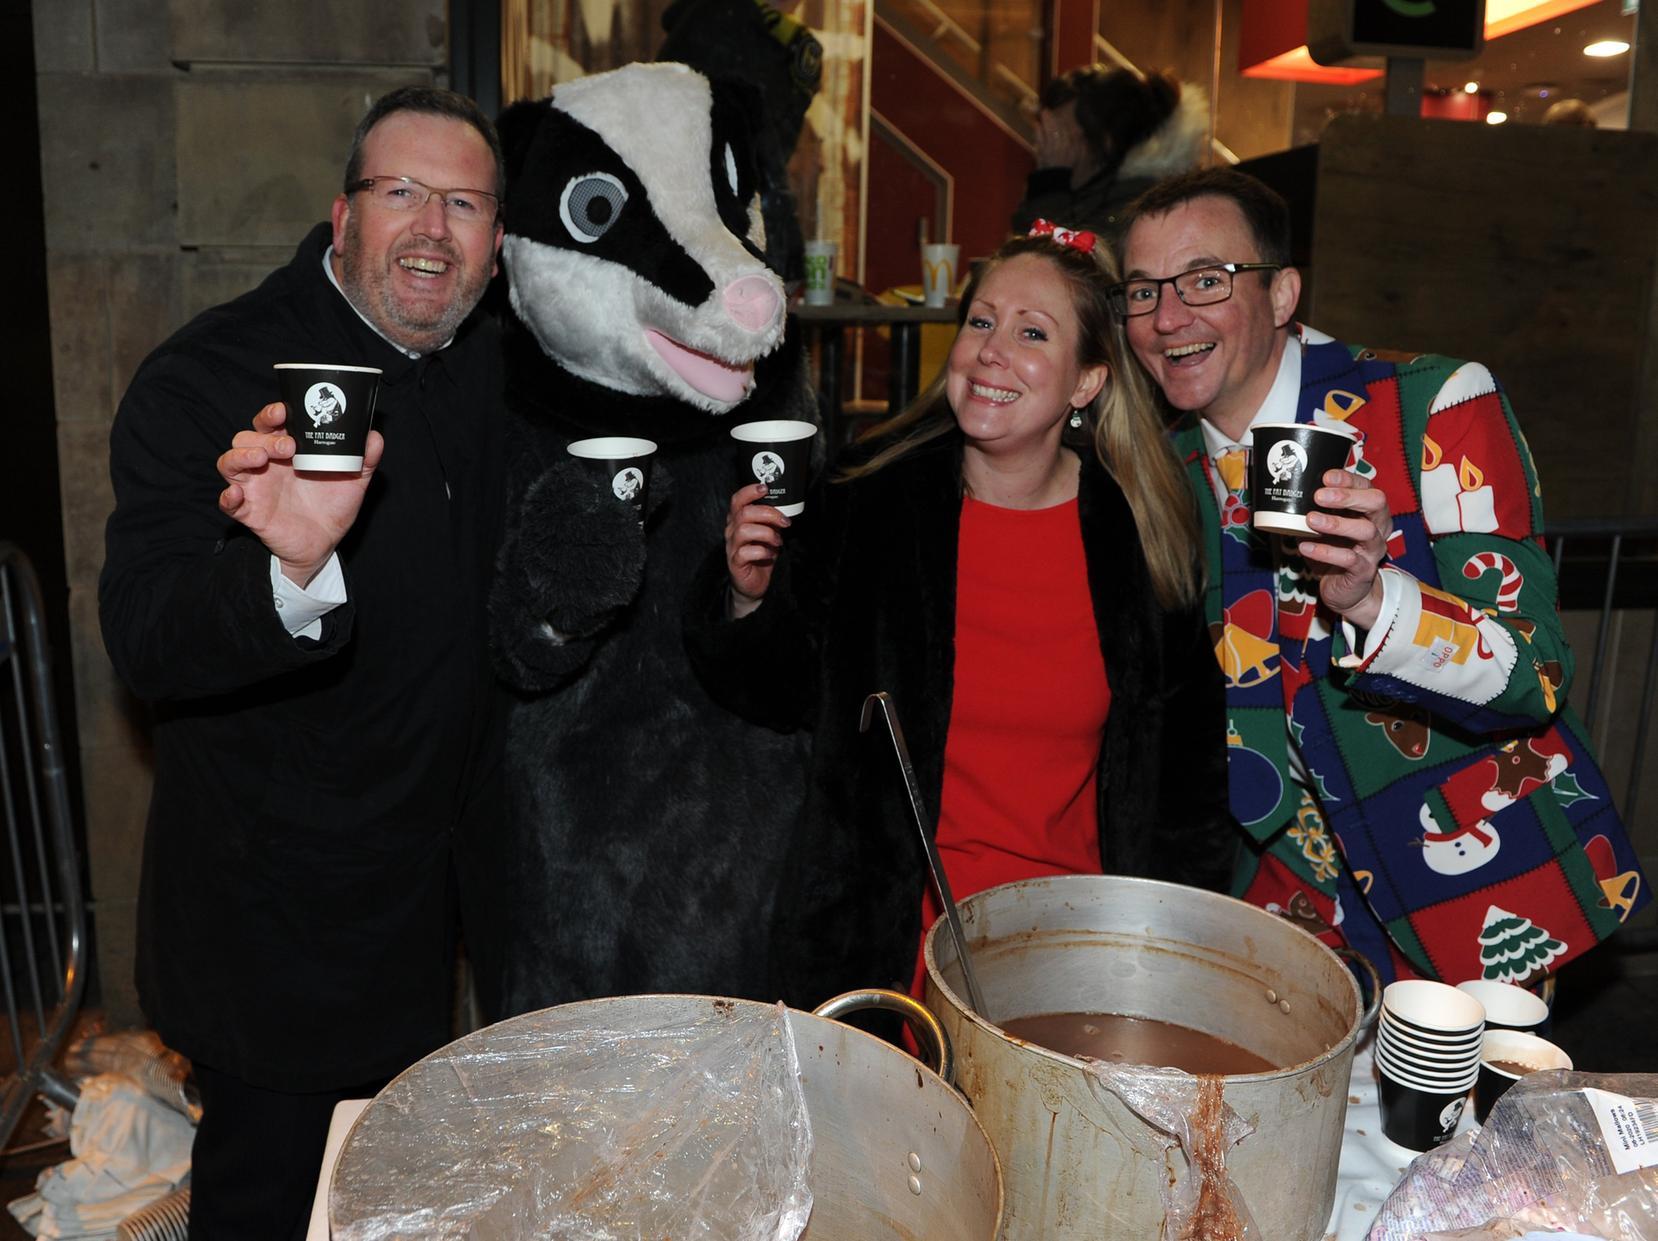 The Fat Badger team serve up free hot chocolate.